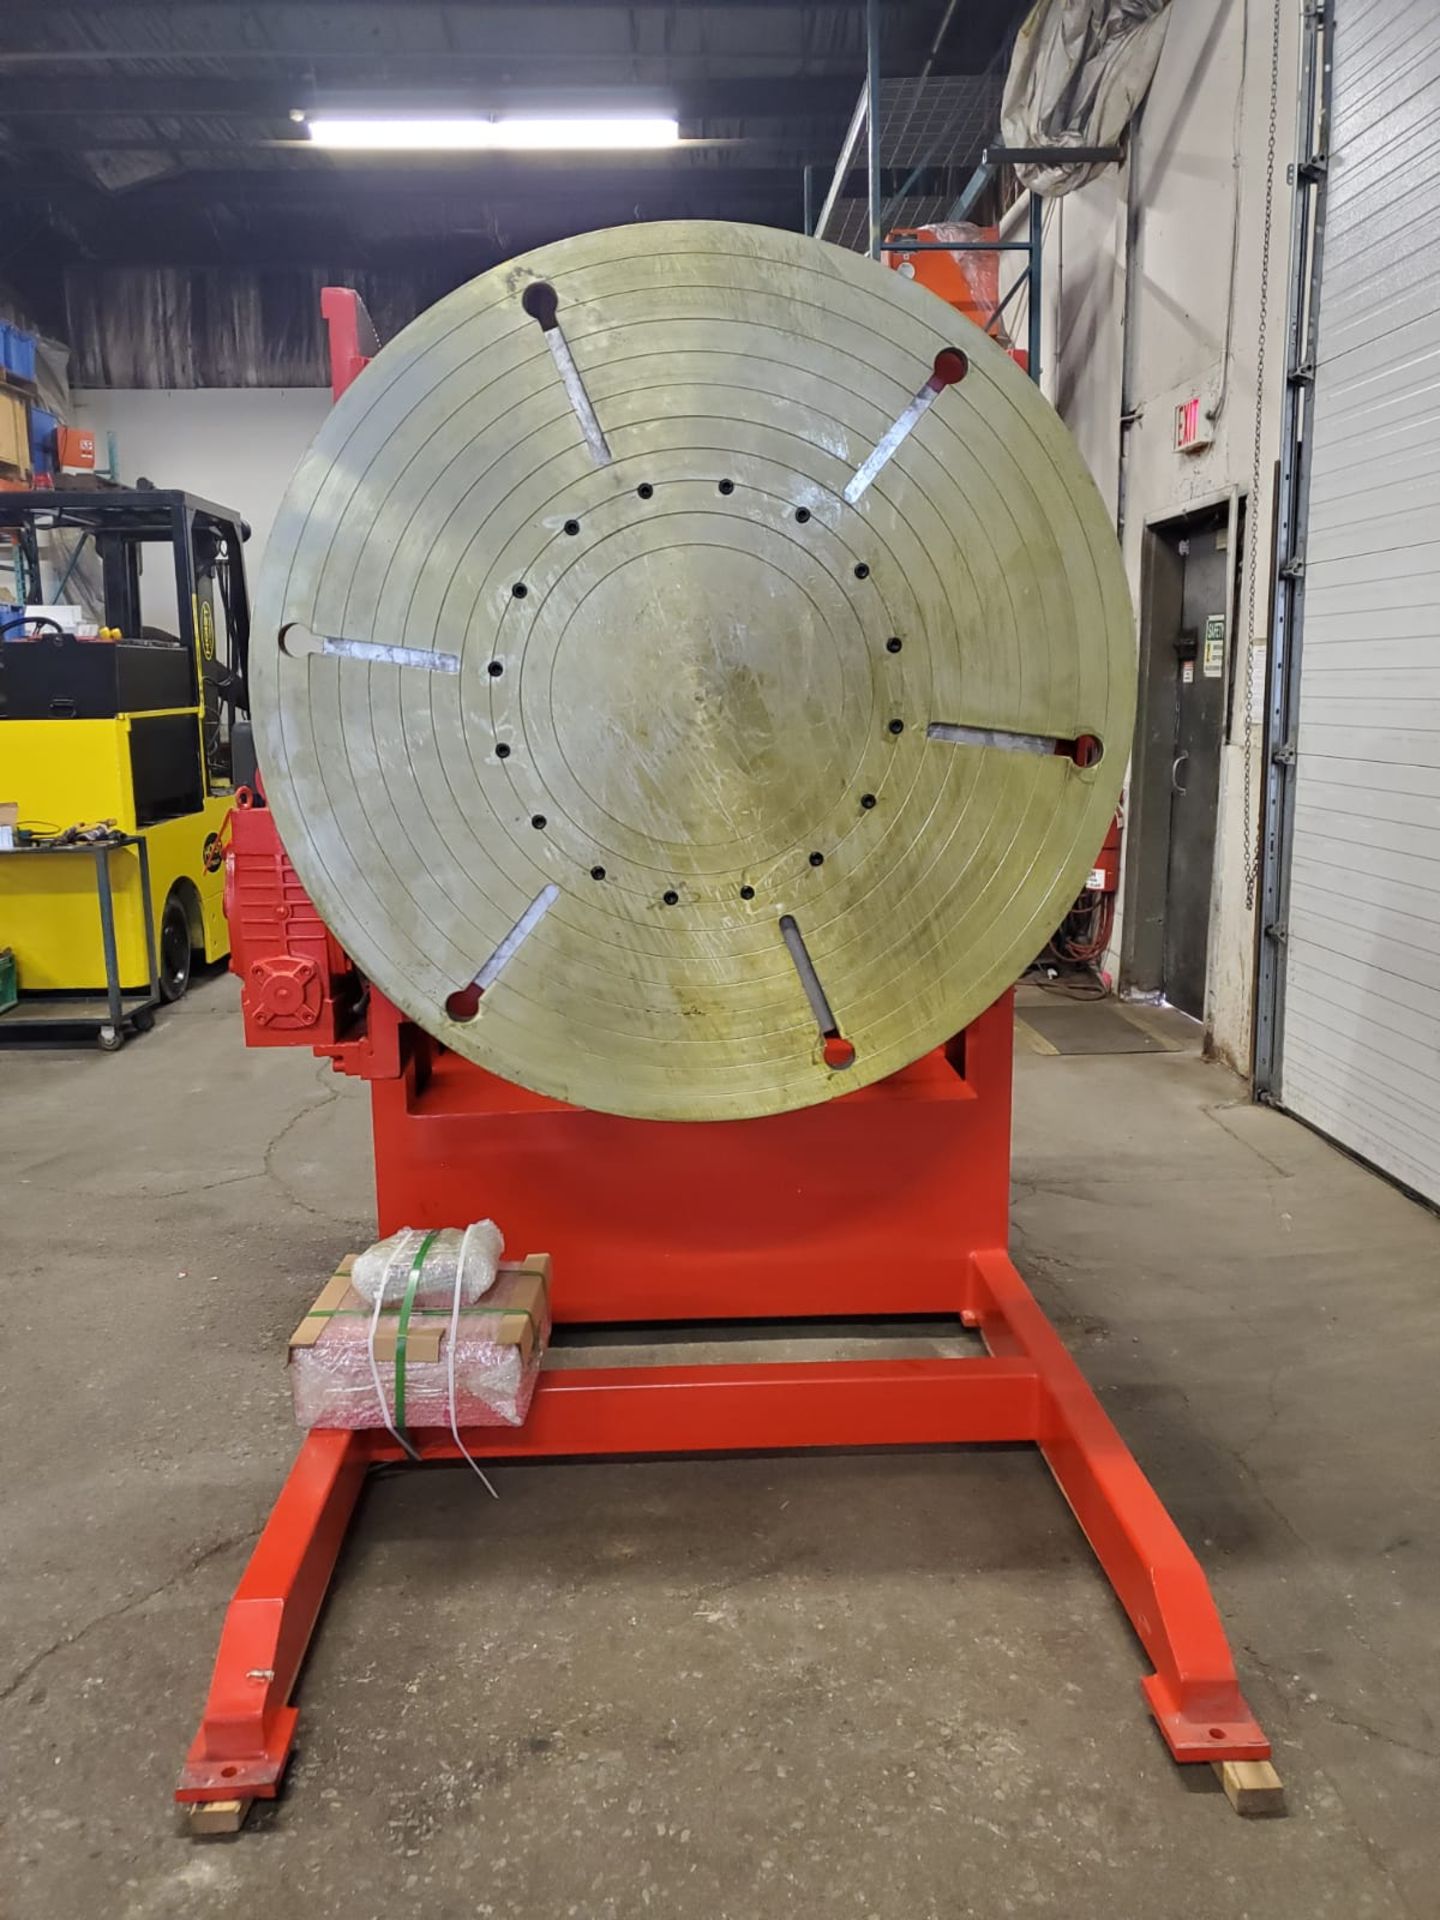 Verner model VD-15000 WELDING POSITIONER 15000lbs capacity - tilt and rotate with variable speed - Image 2 of 2